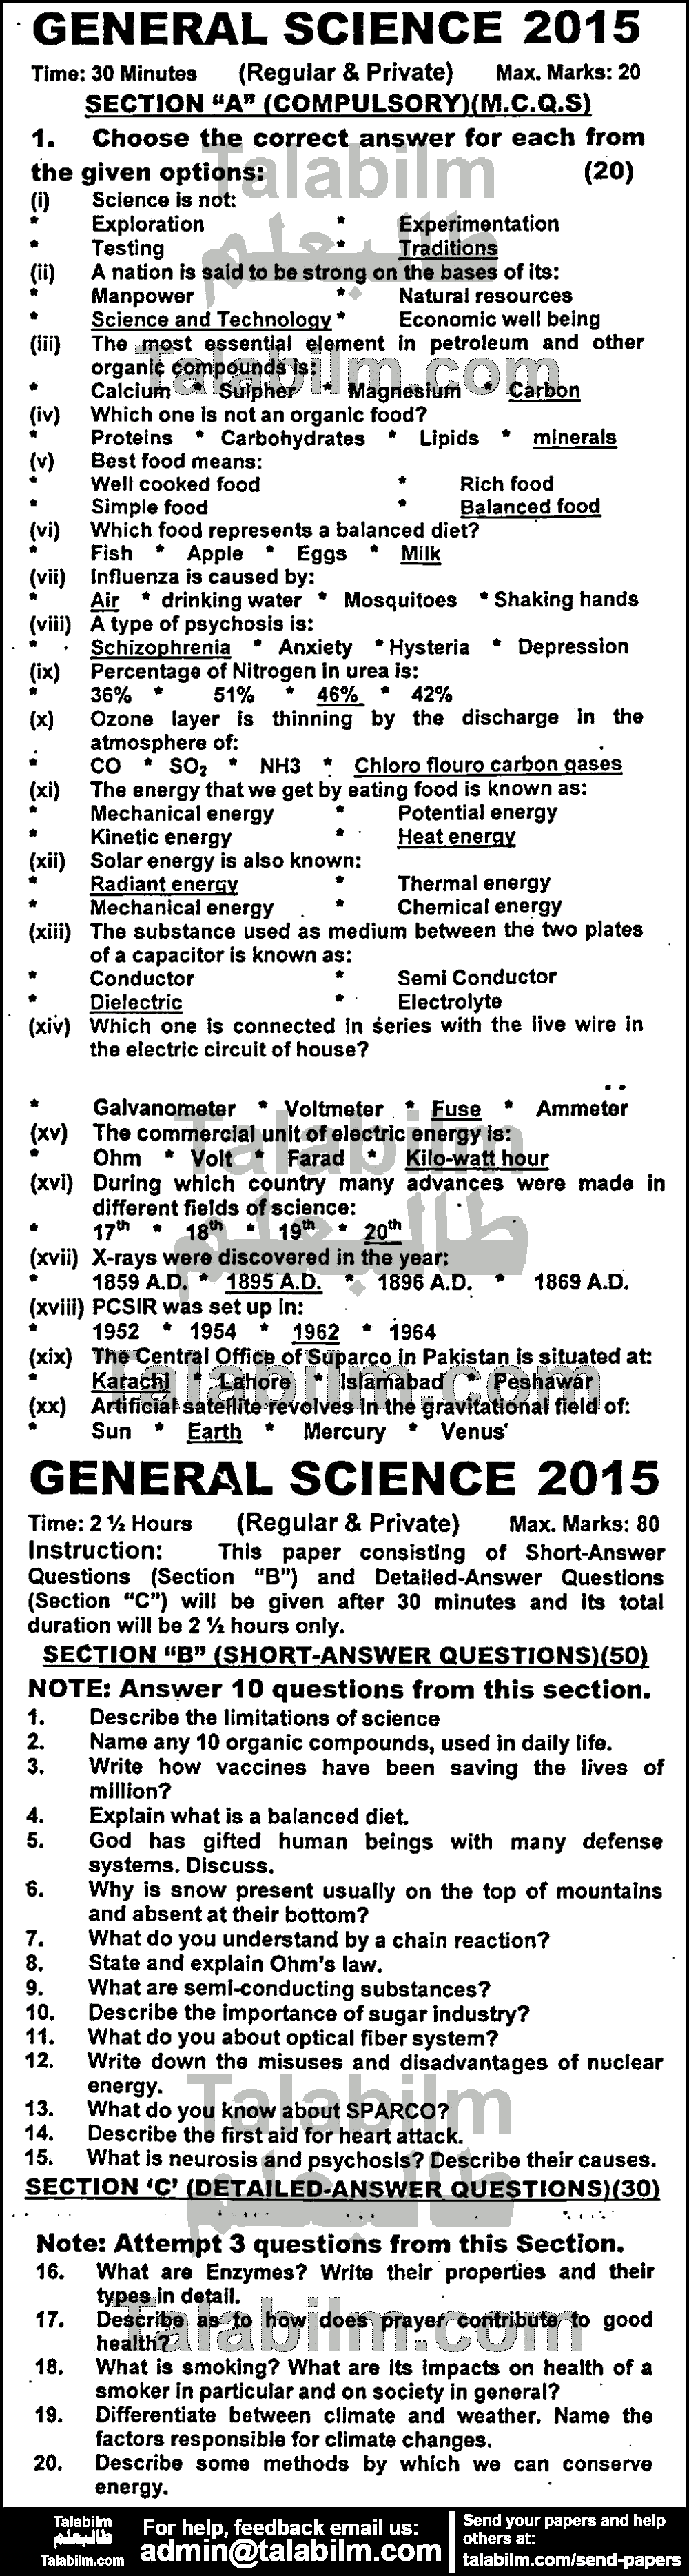 General Science 0 past paper for English Medium 2015 Group-I